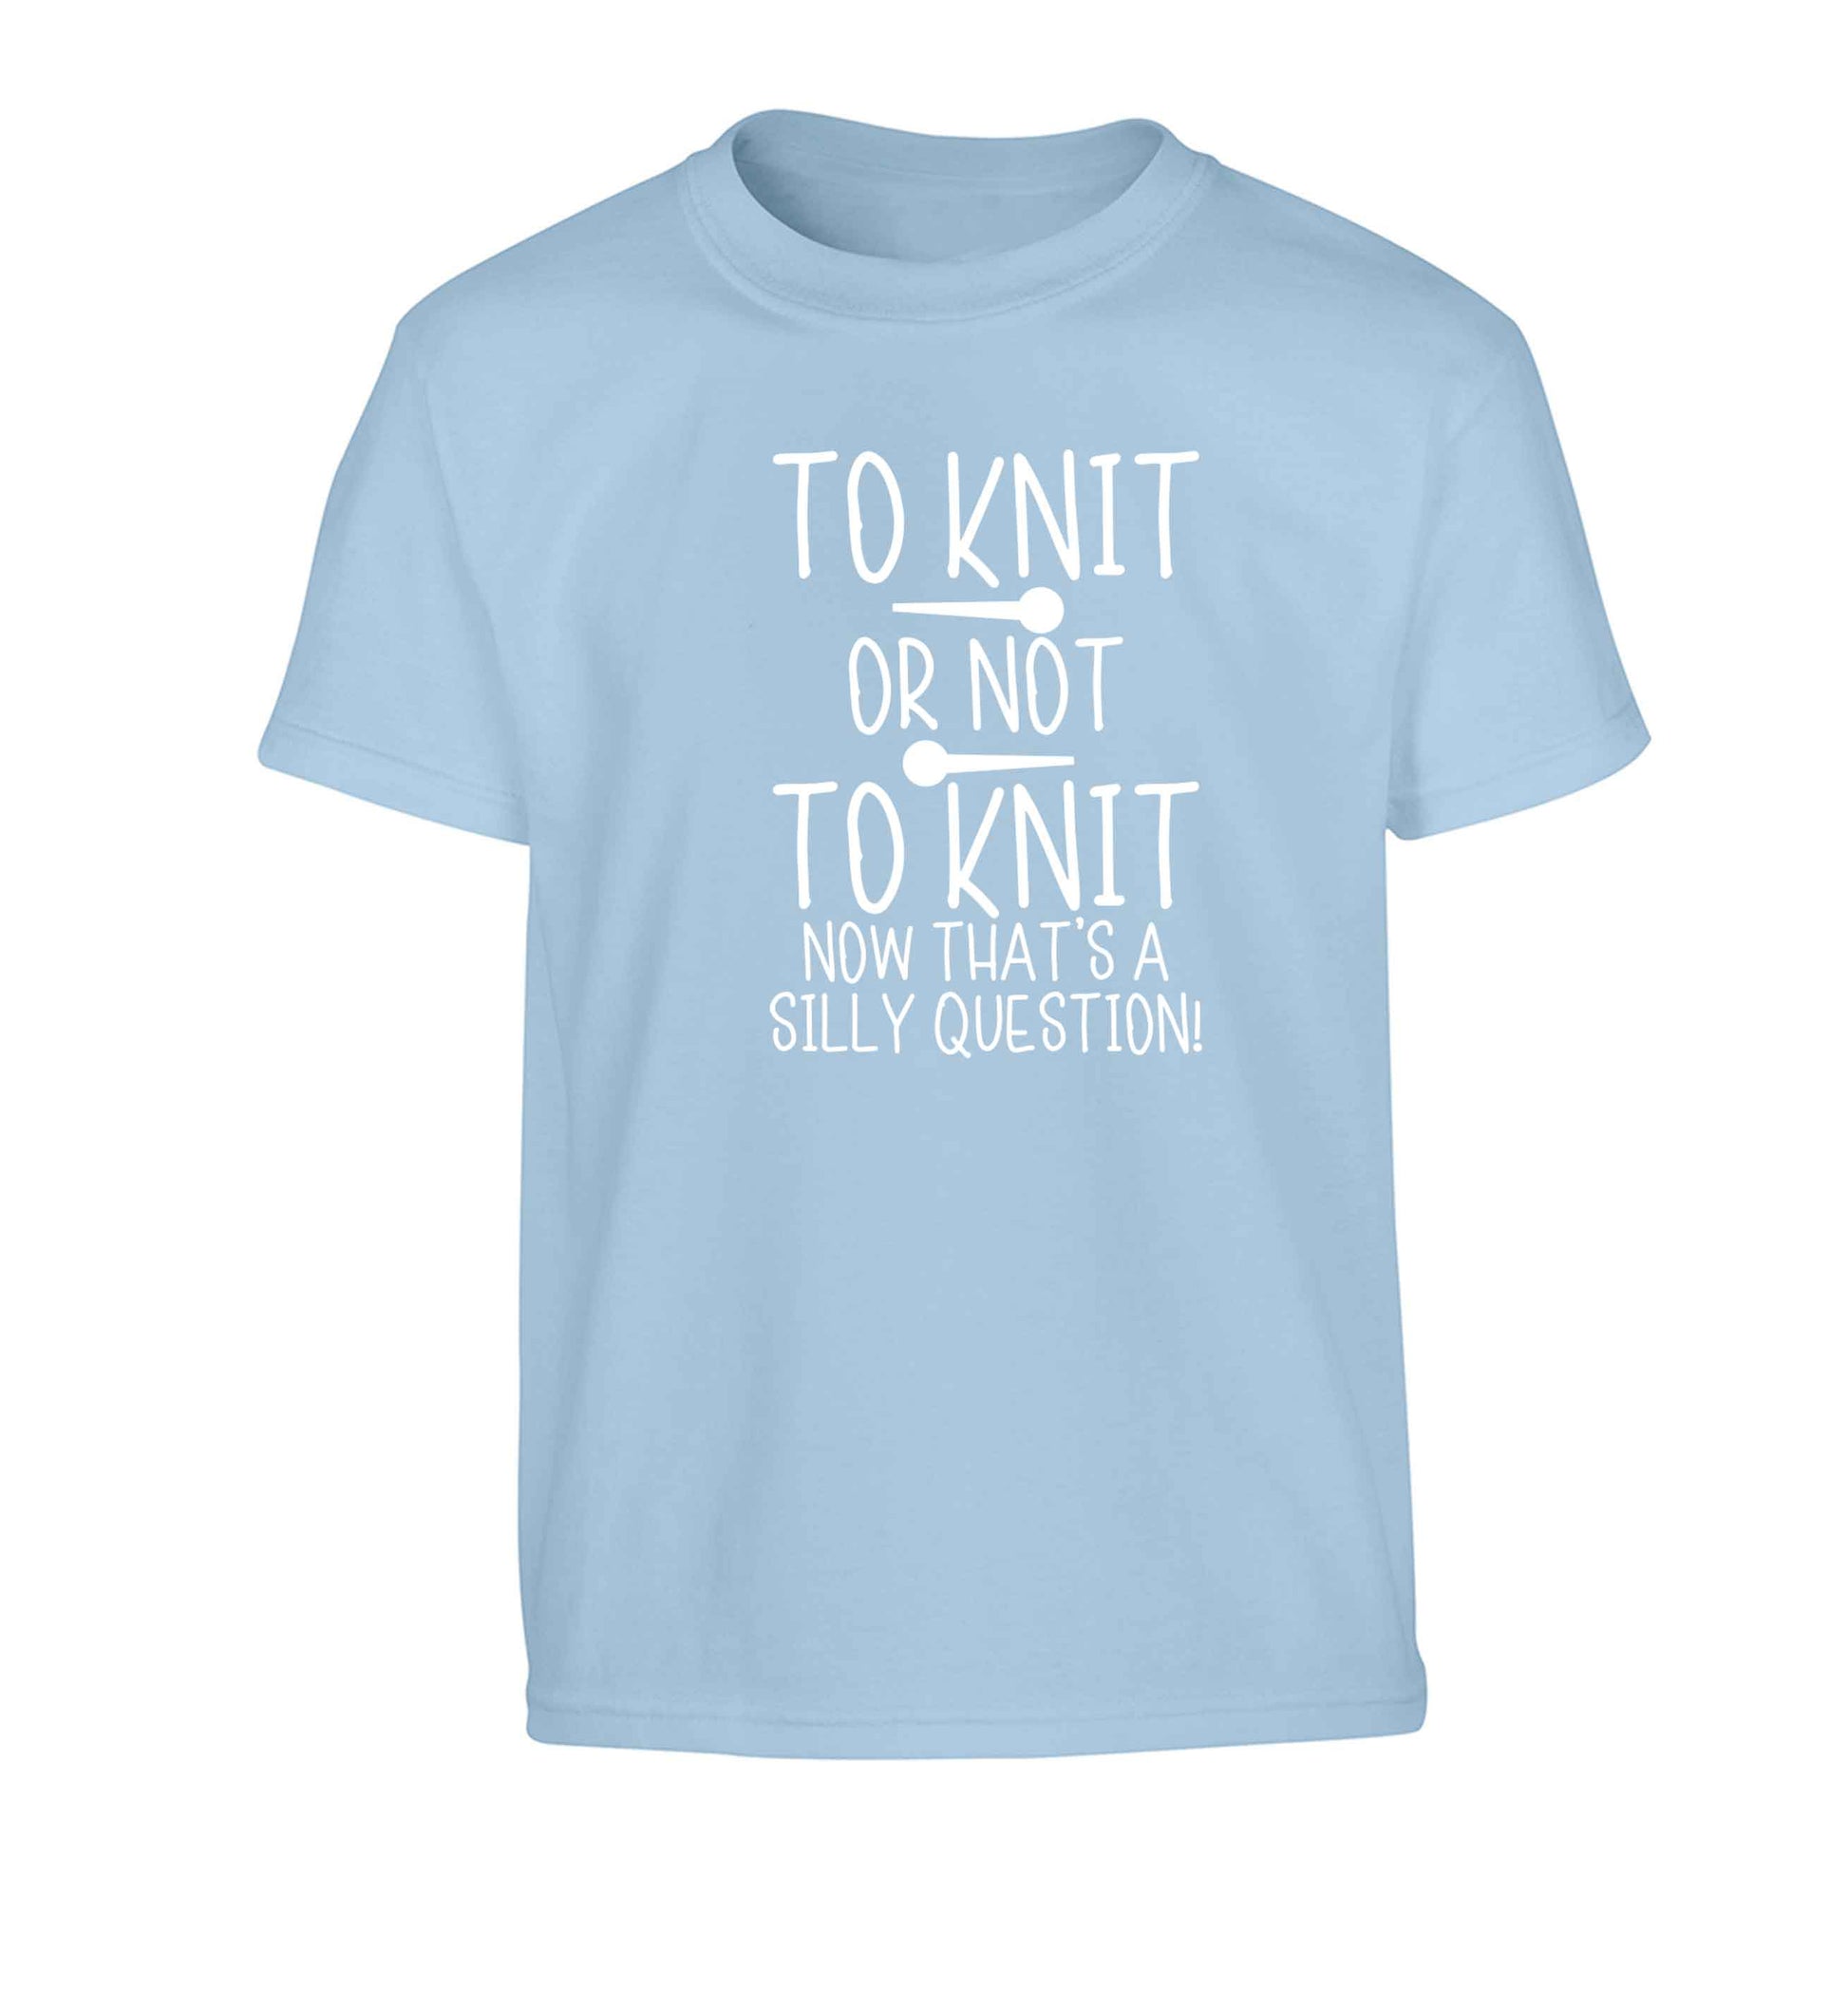 To knit or not to knit now that's a silly question Children's light blue Tshirt 12-13 Years